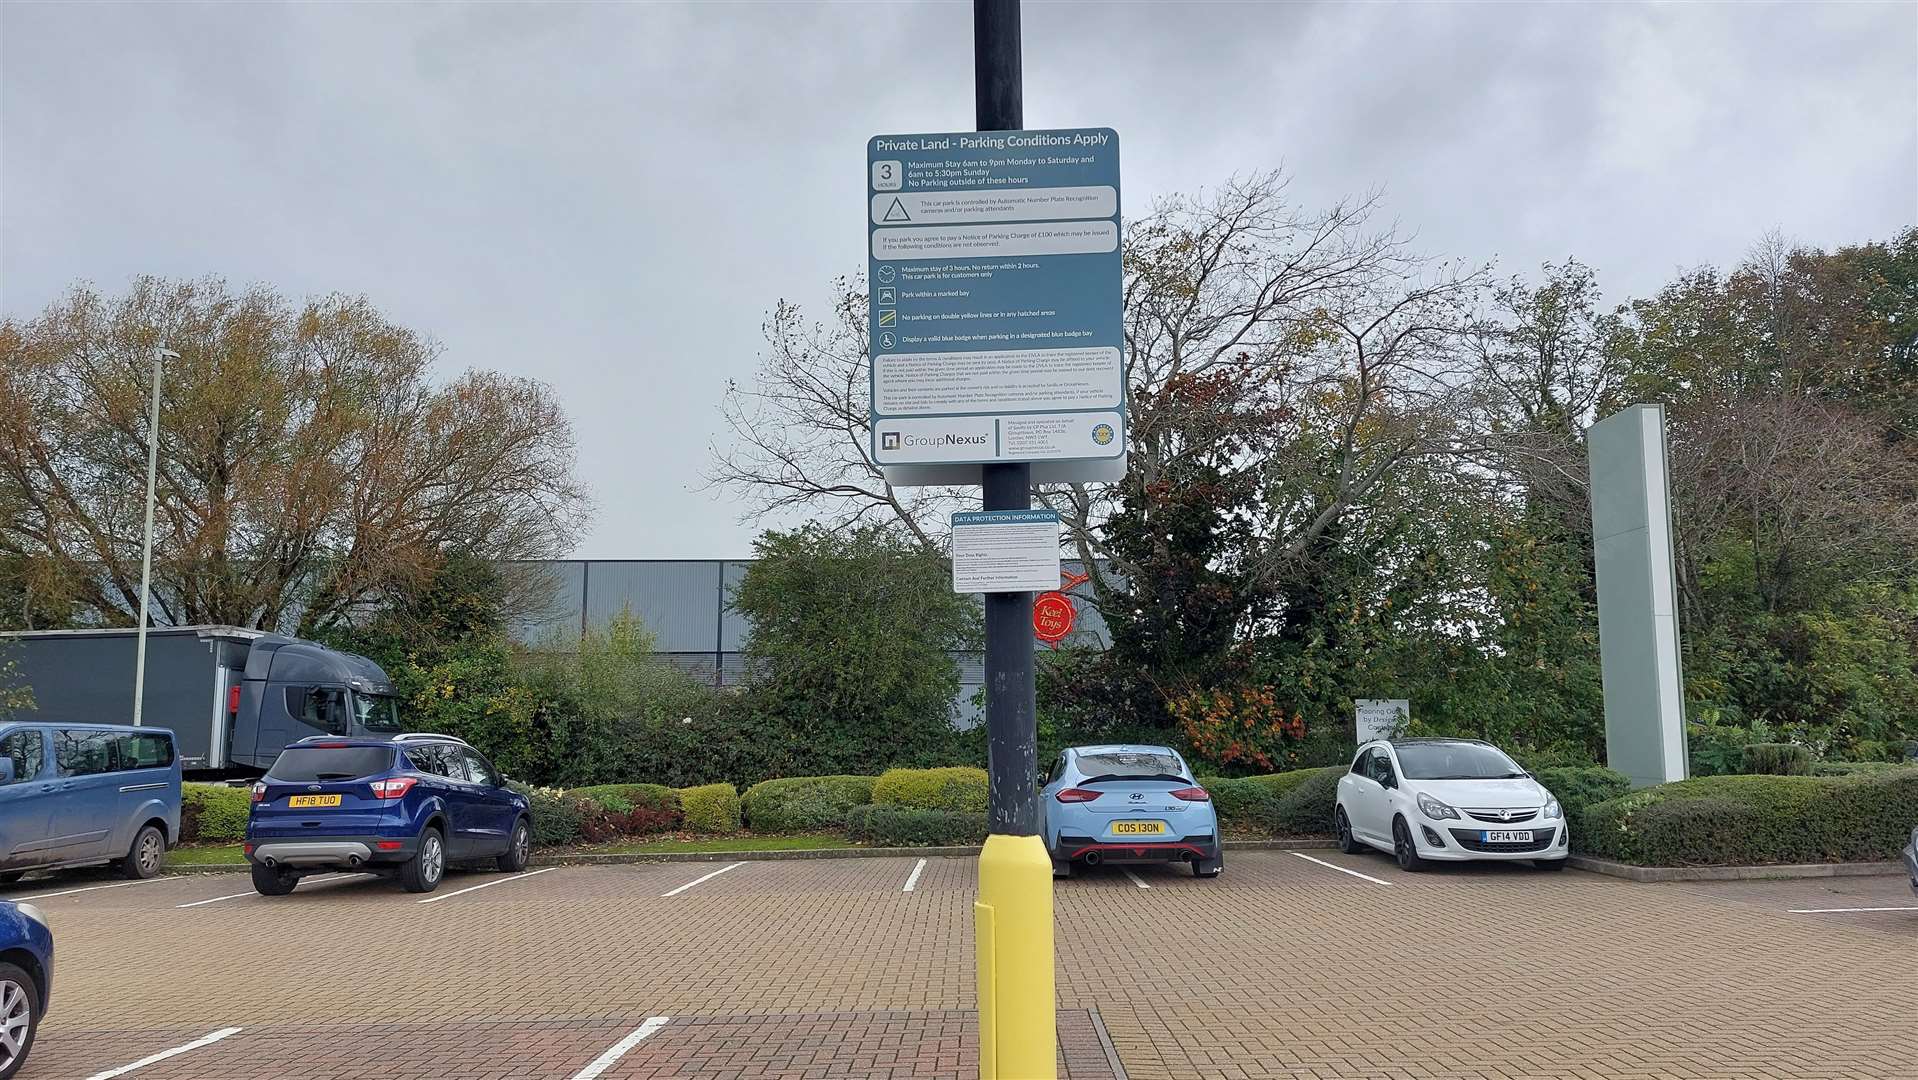 Group Nexus, which runs the car park, says there are a total of 25 signs around the site